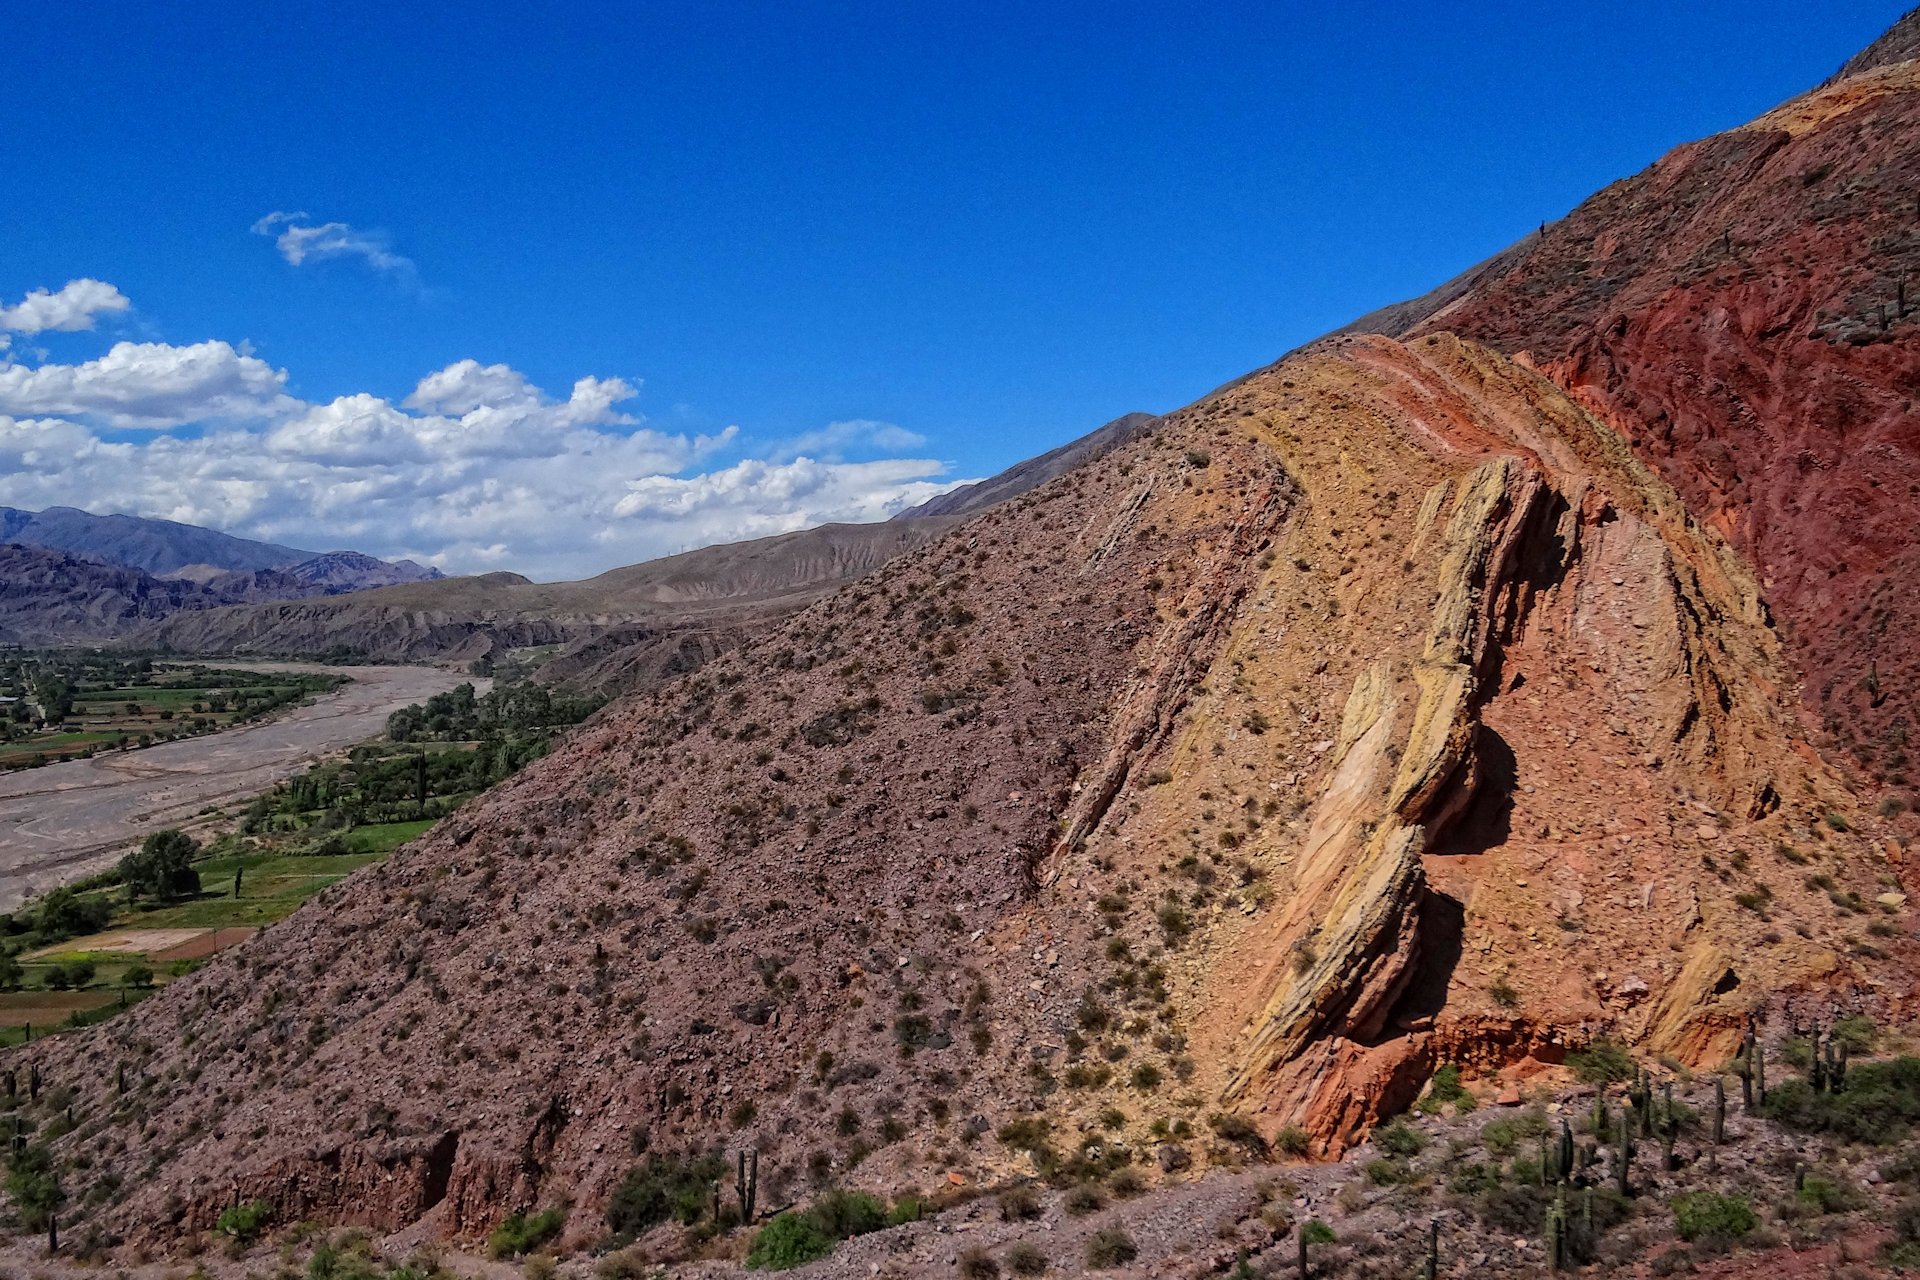 Photo of colored rocks in Maimares, Argentina.